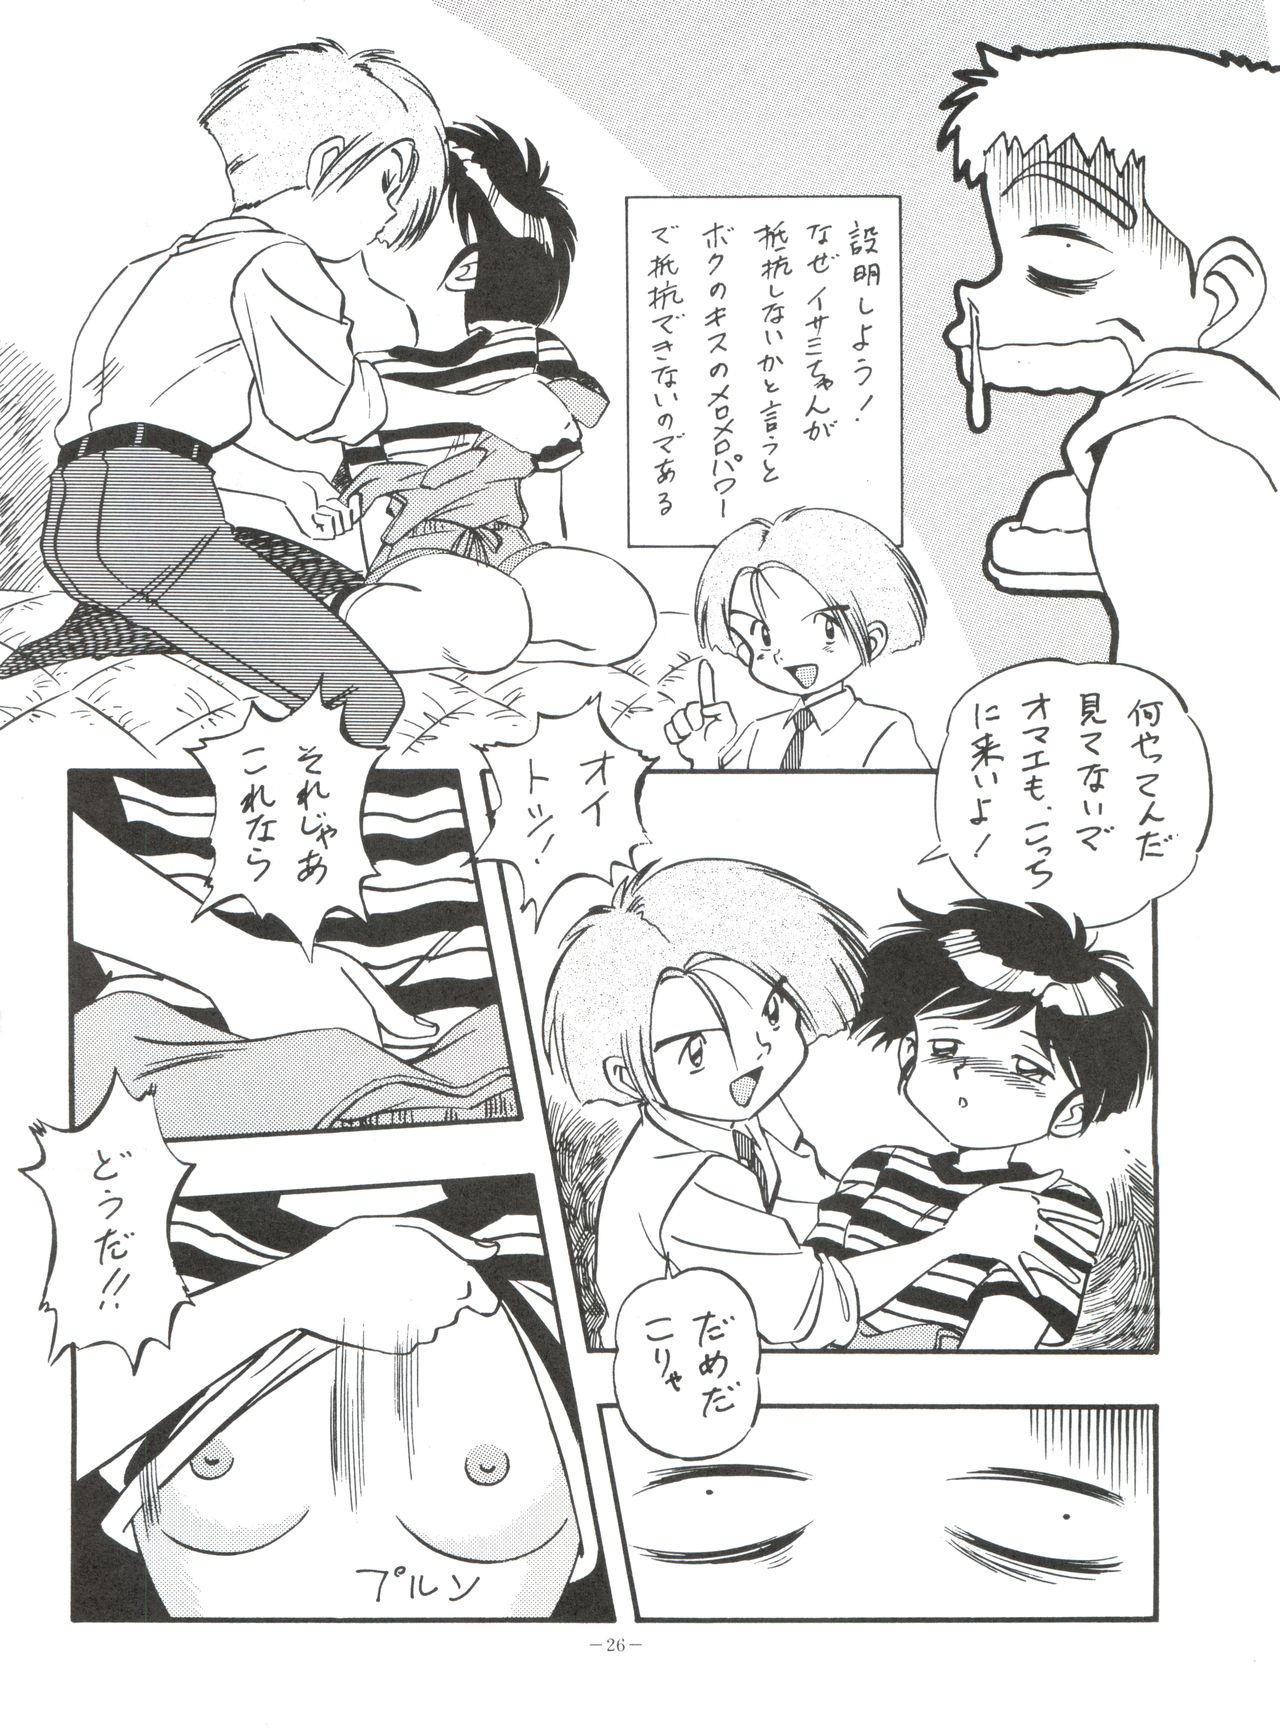 [ALPS (Various)] LOOK OUT 35 (Various) page 25 full